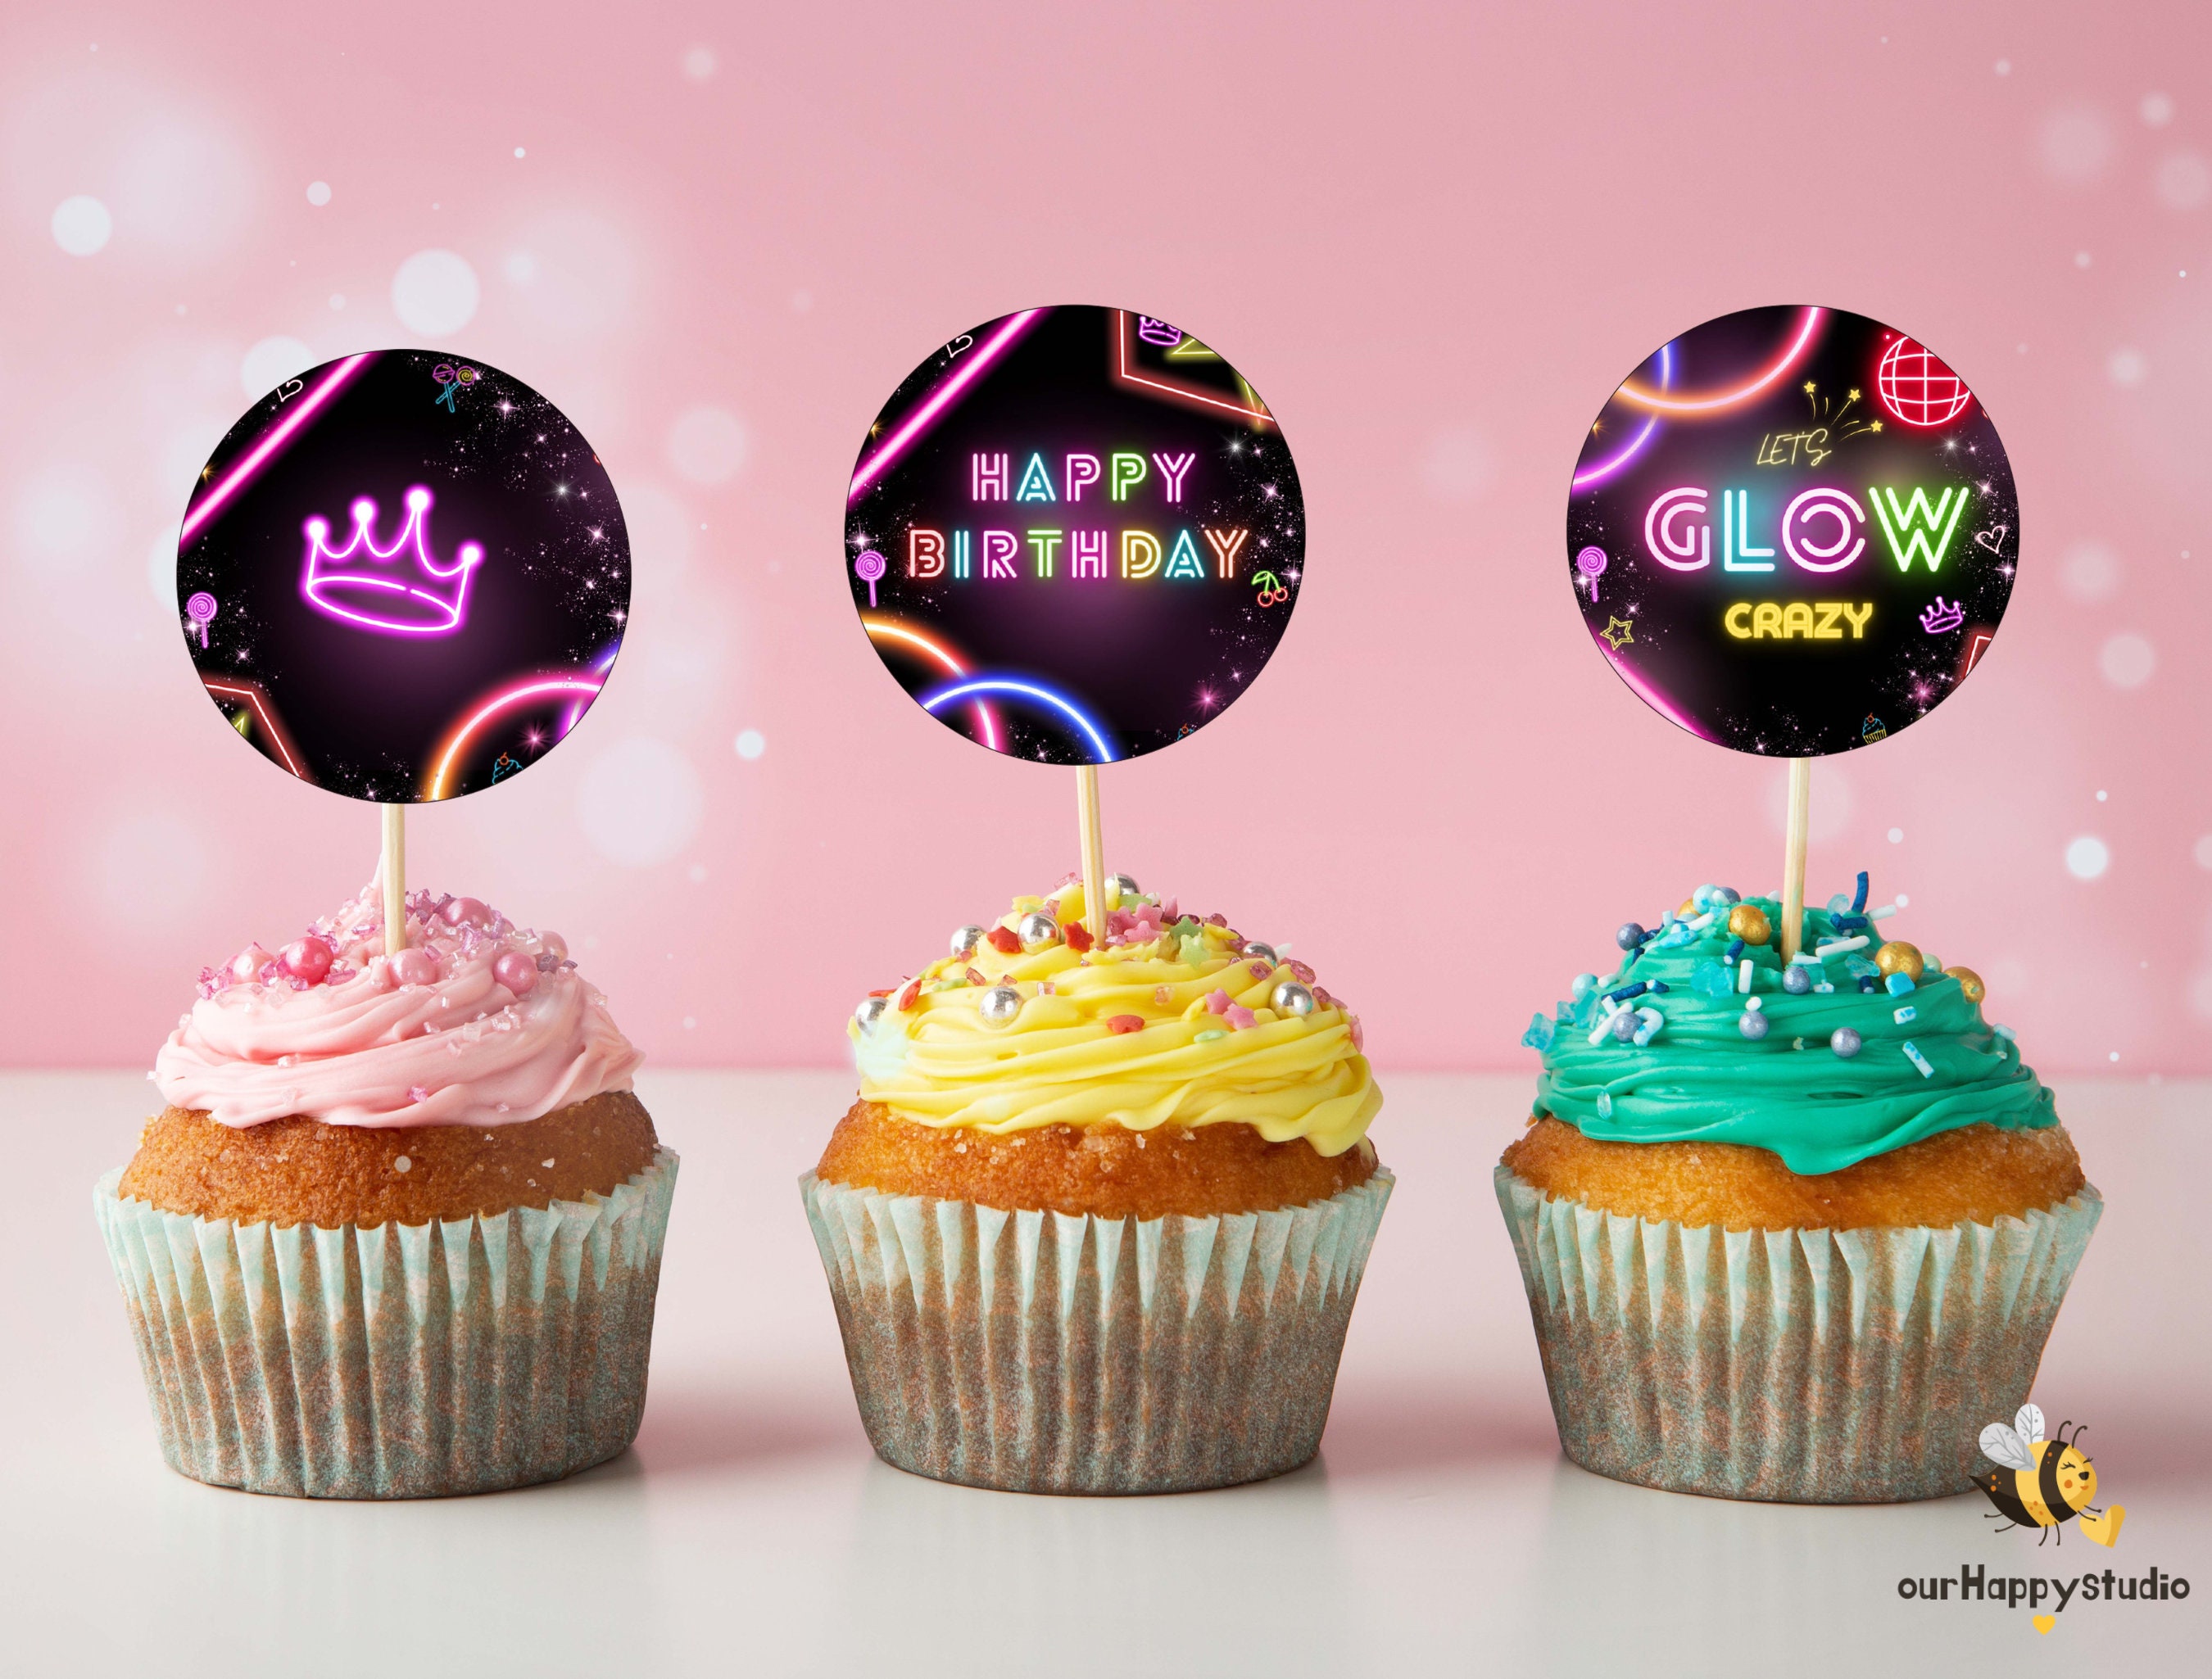 neon food coloring Archives - Cupcake Fanatic